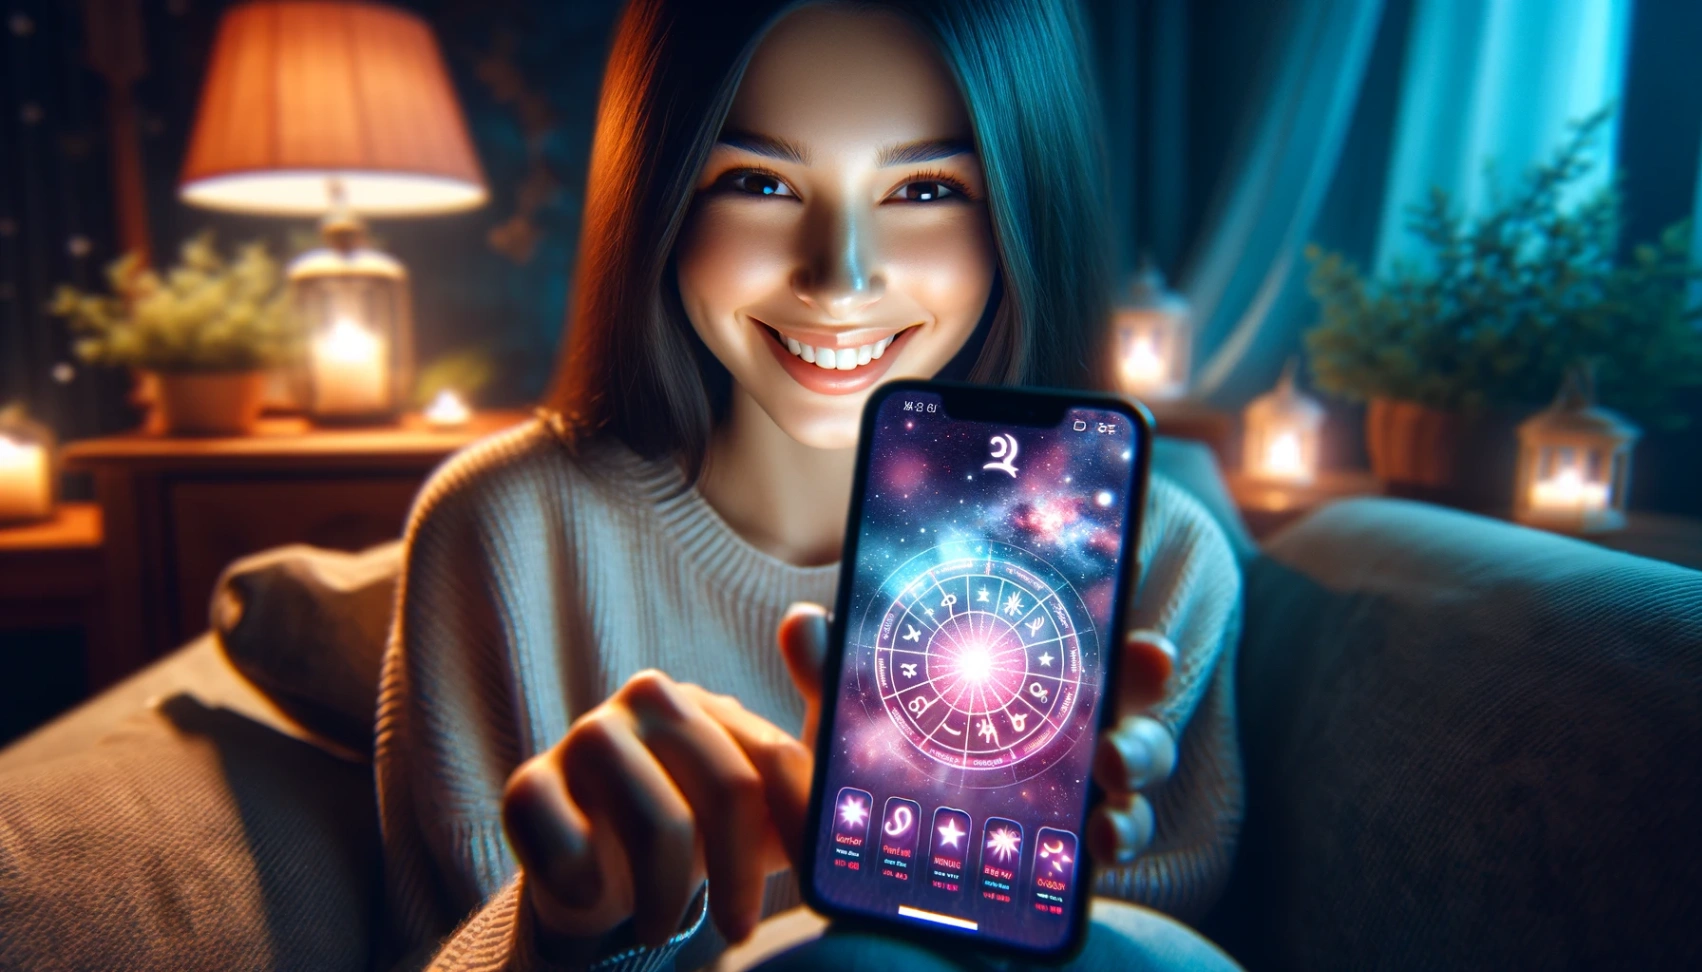 Mobile Horoscope App - How to Download for Free